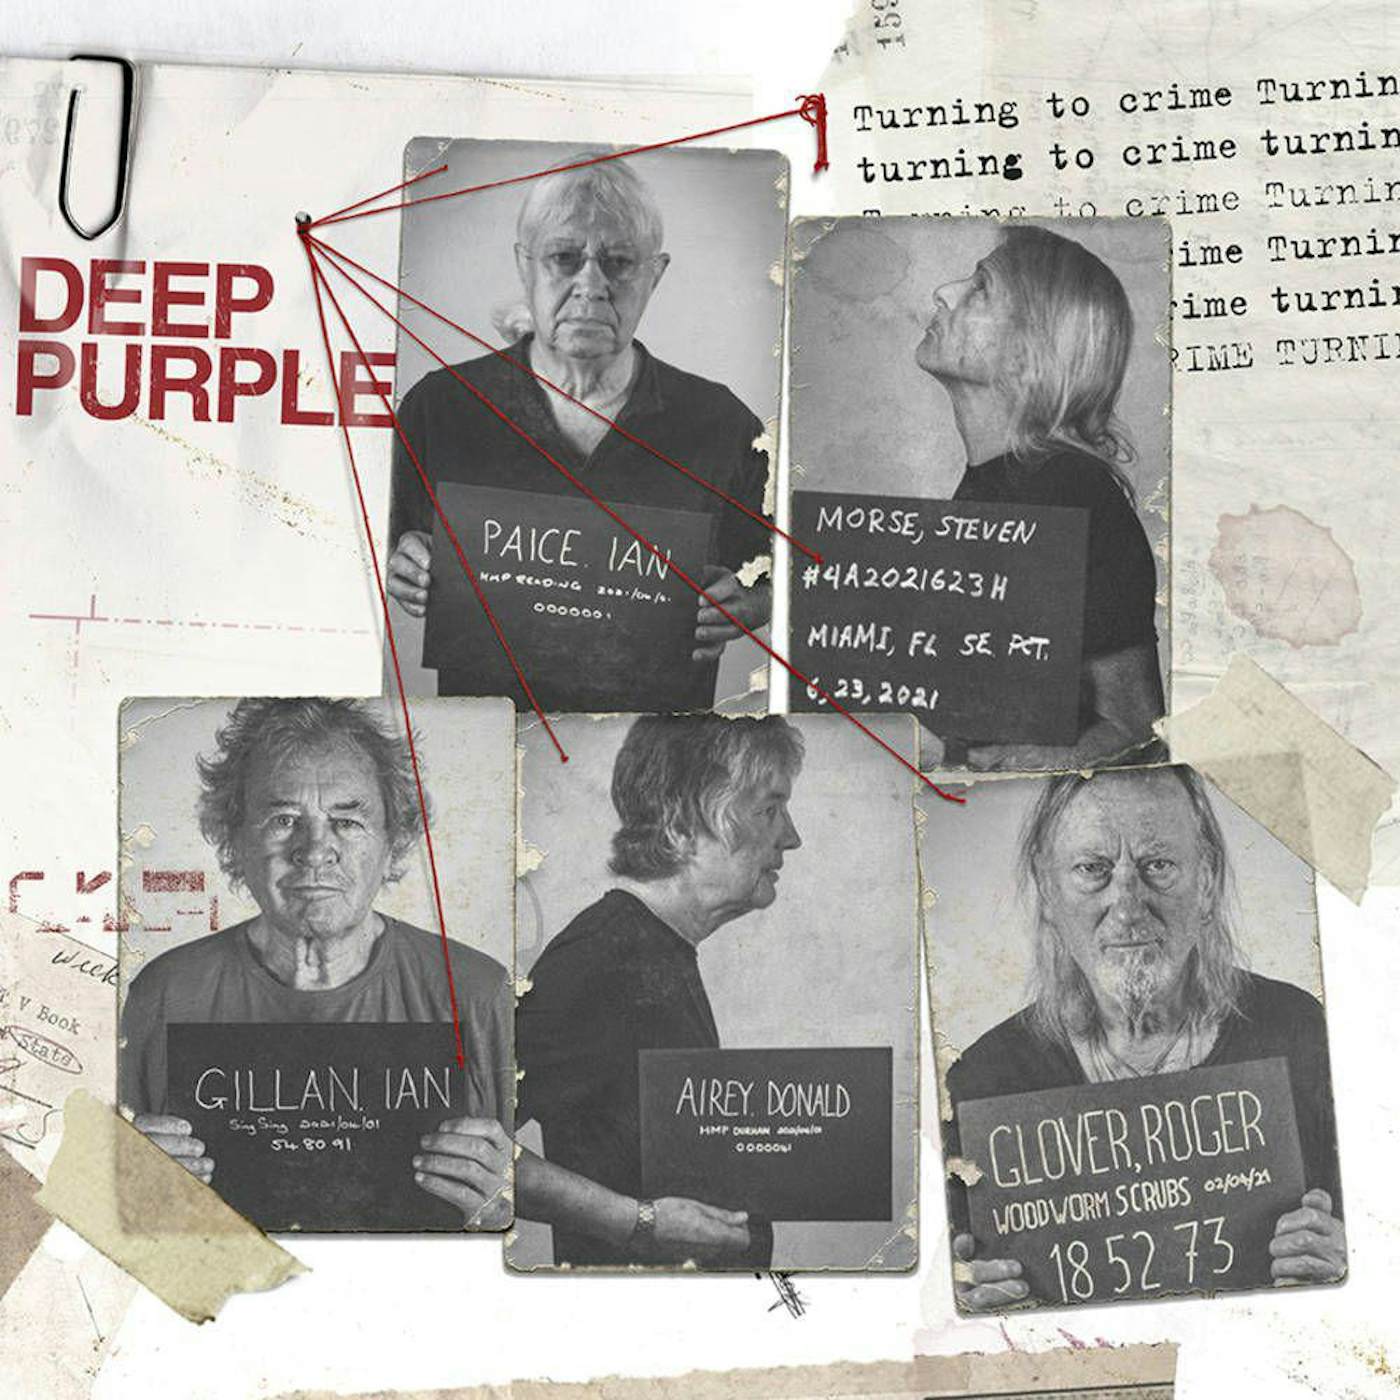 Deep Purple TURNING TO CRIME on Crystal Clear Vinyl